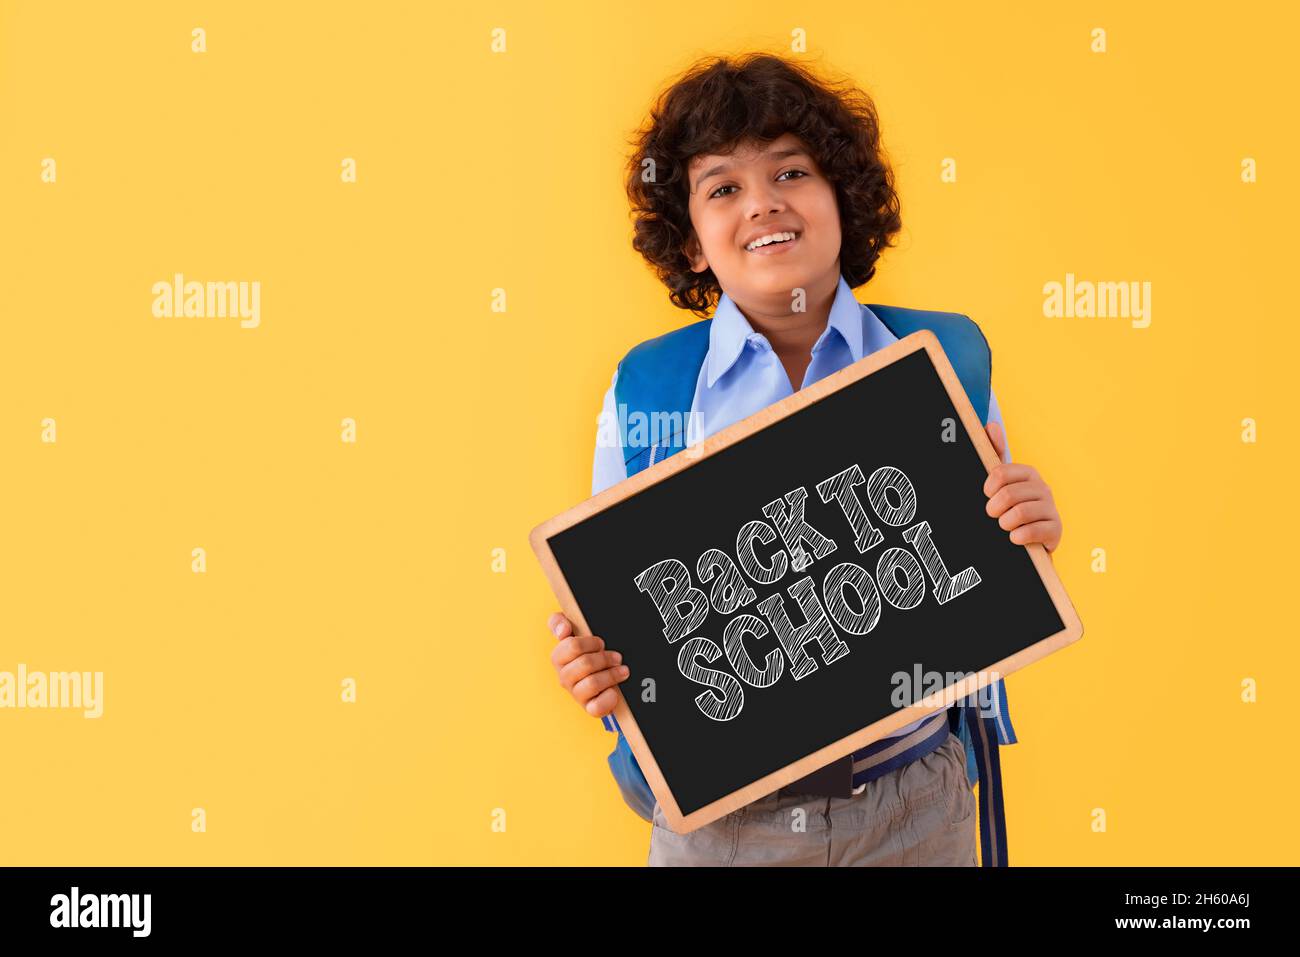 A BOY IN SCHOOL UNIFORM HAPPILY DISPLAYING MESSAGE OF BACK TO SCHOOL AFTER PANDEMIC Stock Photo